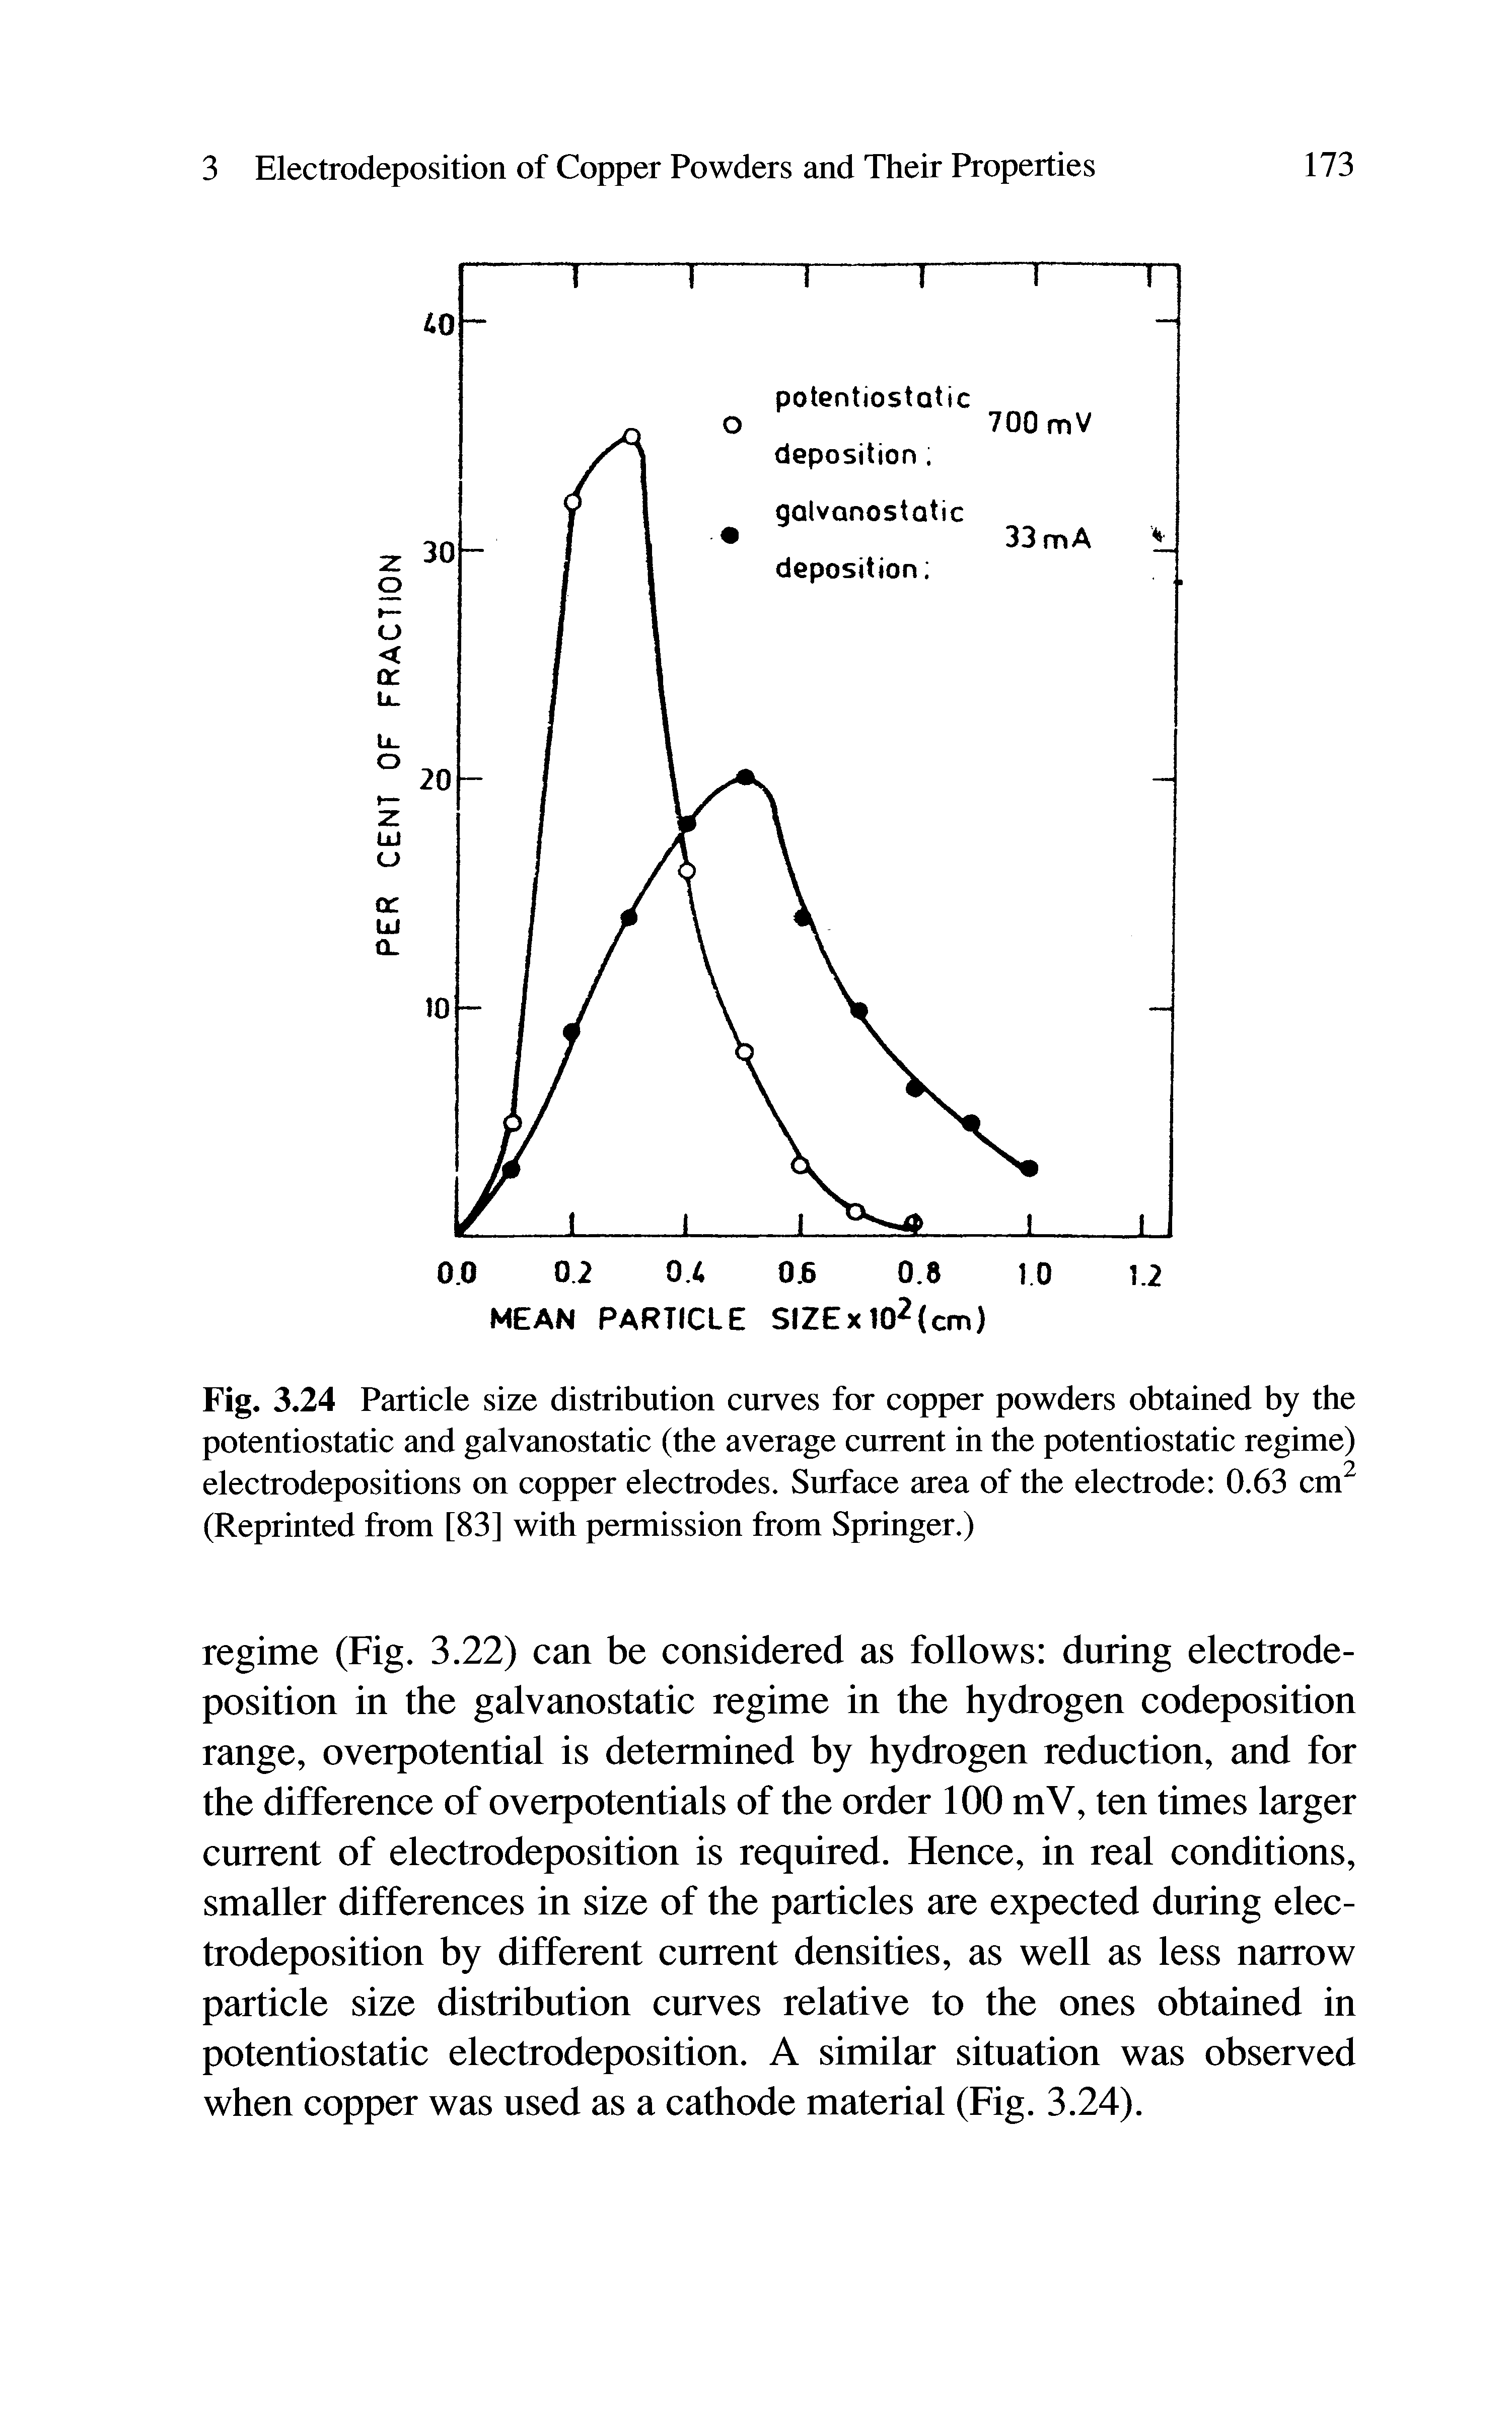 Fig. 3.24 Particle size distribution curves for copper powders obtained by the potentiostatic and galvanostatic (the average current in the potentiostatic regime) electrodepositions on copper electrodes. Surface area of the electrode 0.63 cm (Reprinted from [83] with permission from Springer.)...